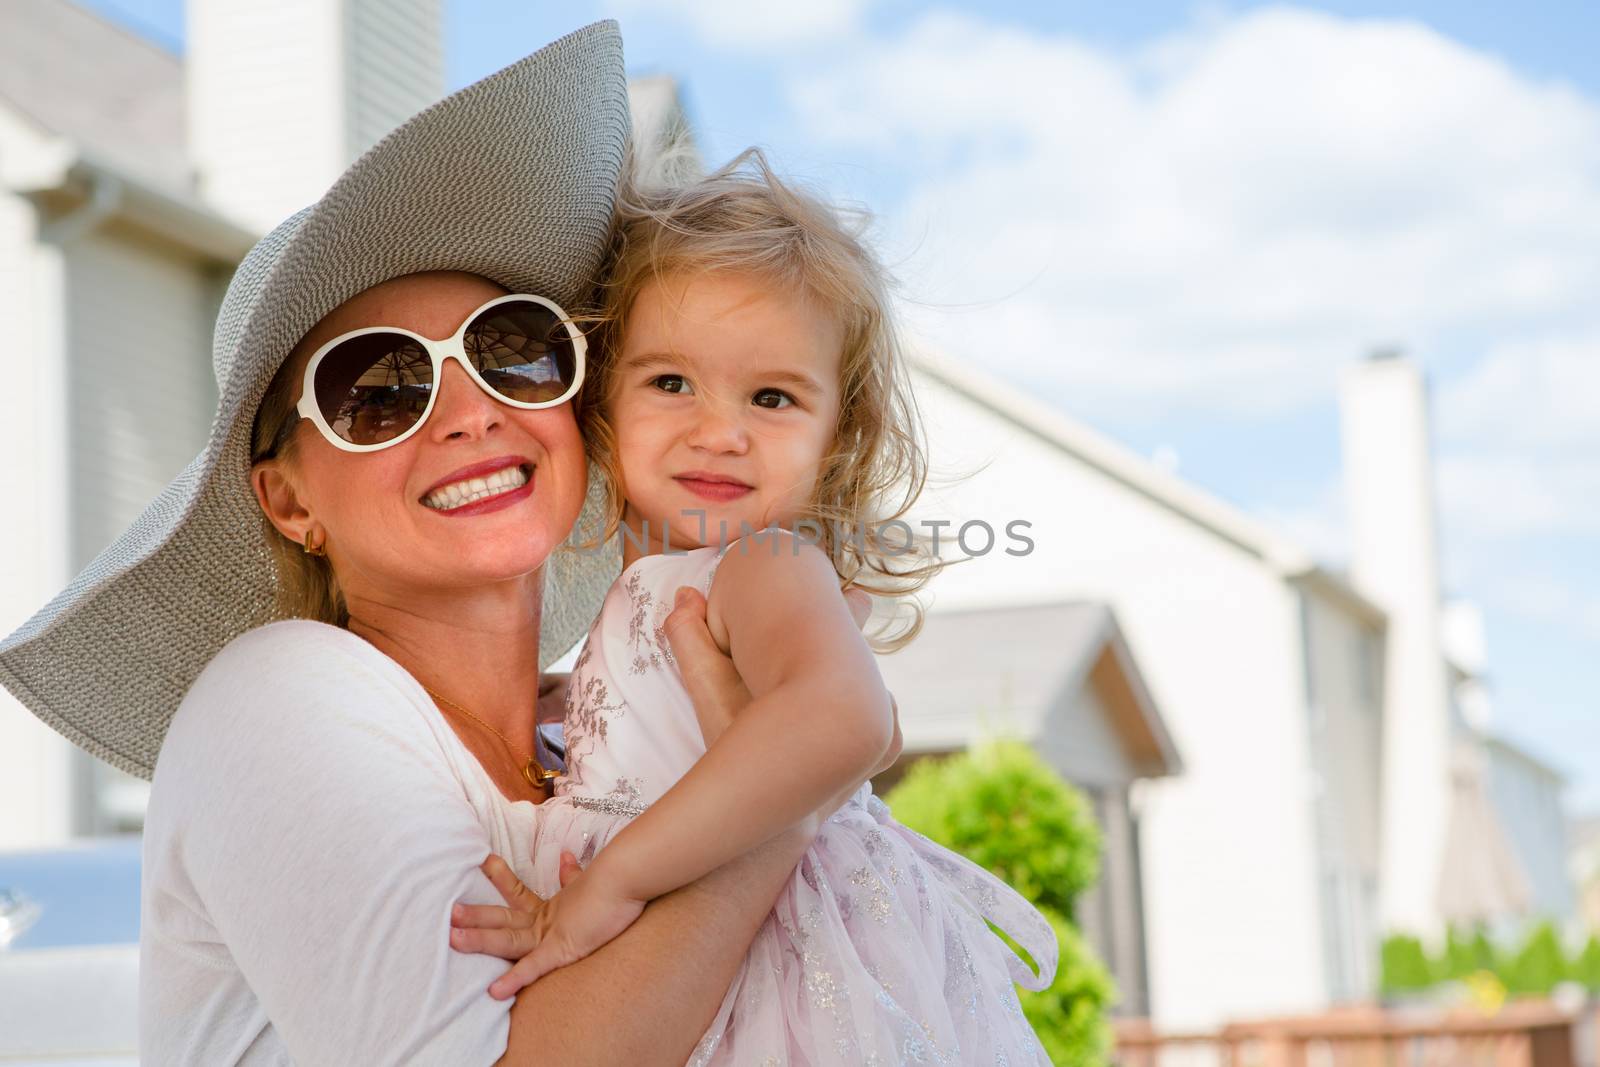 Waist Up Portrait of Woman Wearing Sun Hat and Sunglasses Hugging Young Blond Girl Outdoors in Backyard on Sunny Summer Day